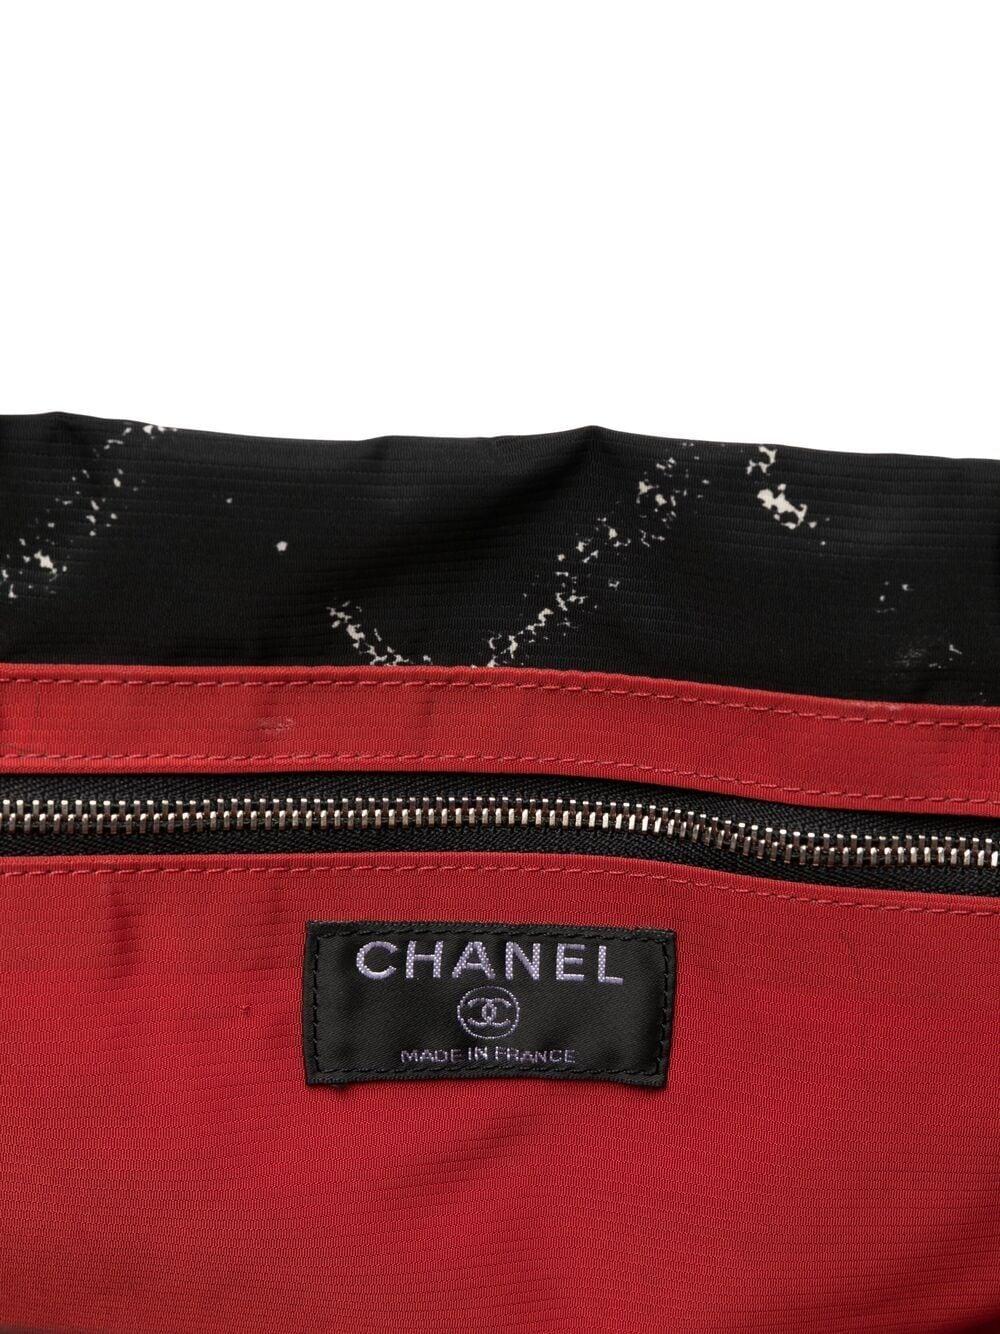 Chanel Large Black Tote Bag In Good Condition For Sale In Paris, FR